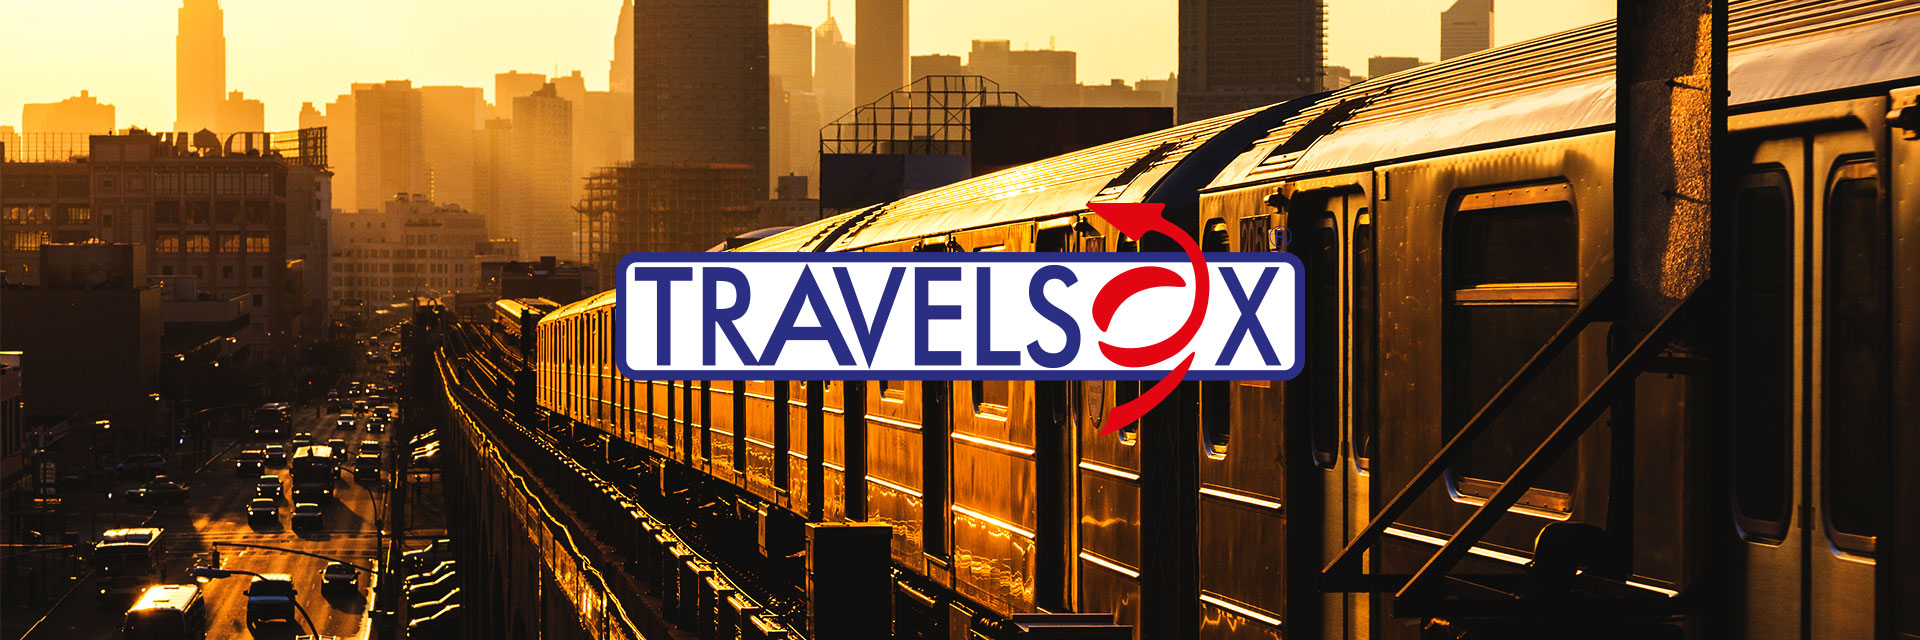 Travelsox logo with a train backdrop.